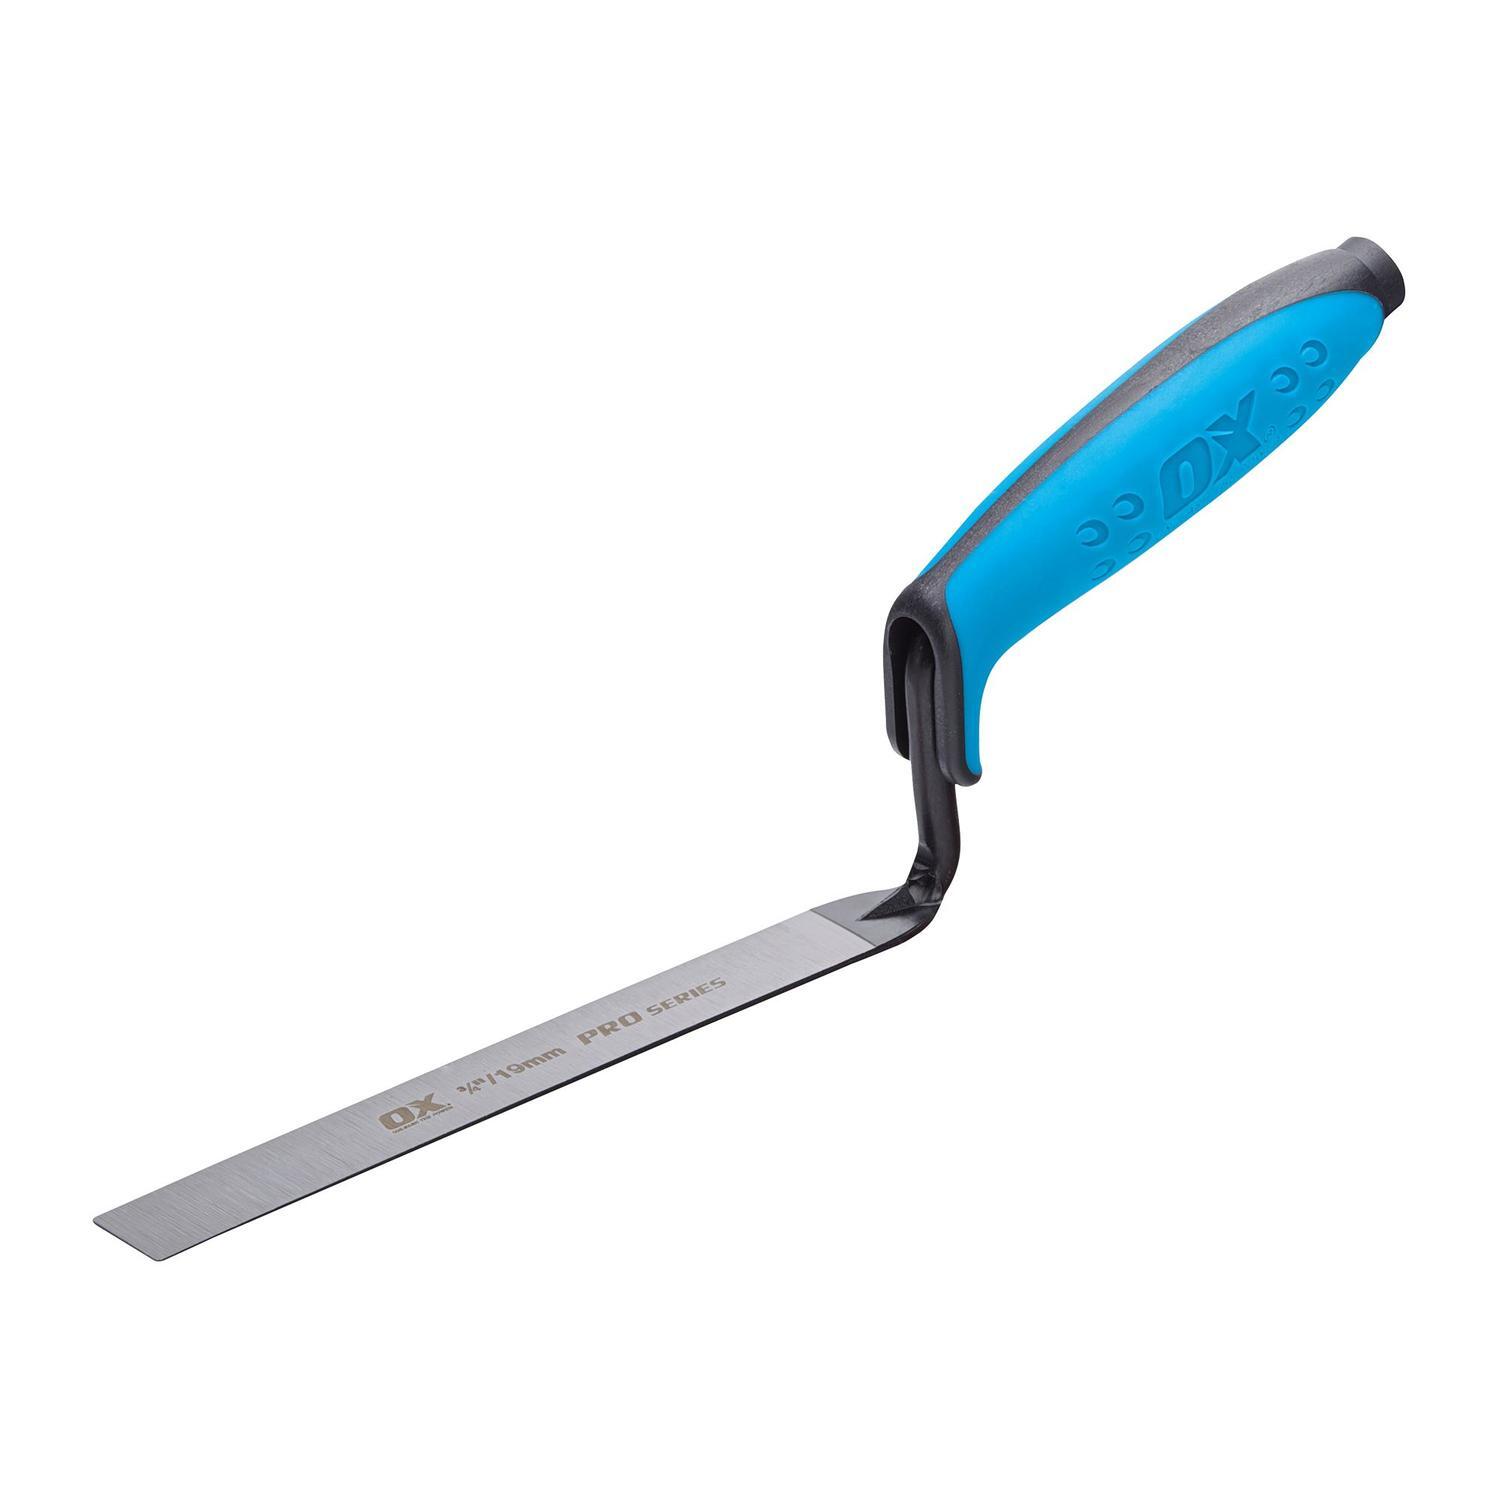 Ox Professional Professional Mortar Smoothing Tool 6mm Blue